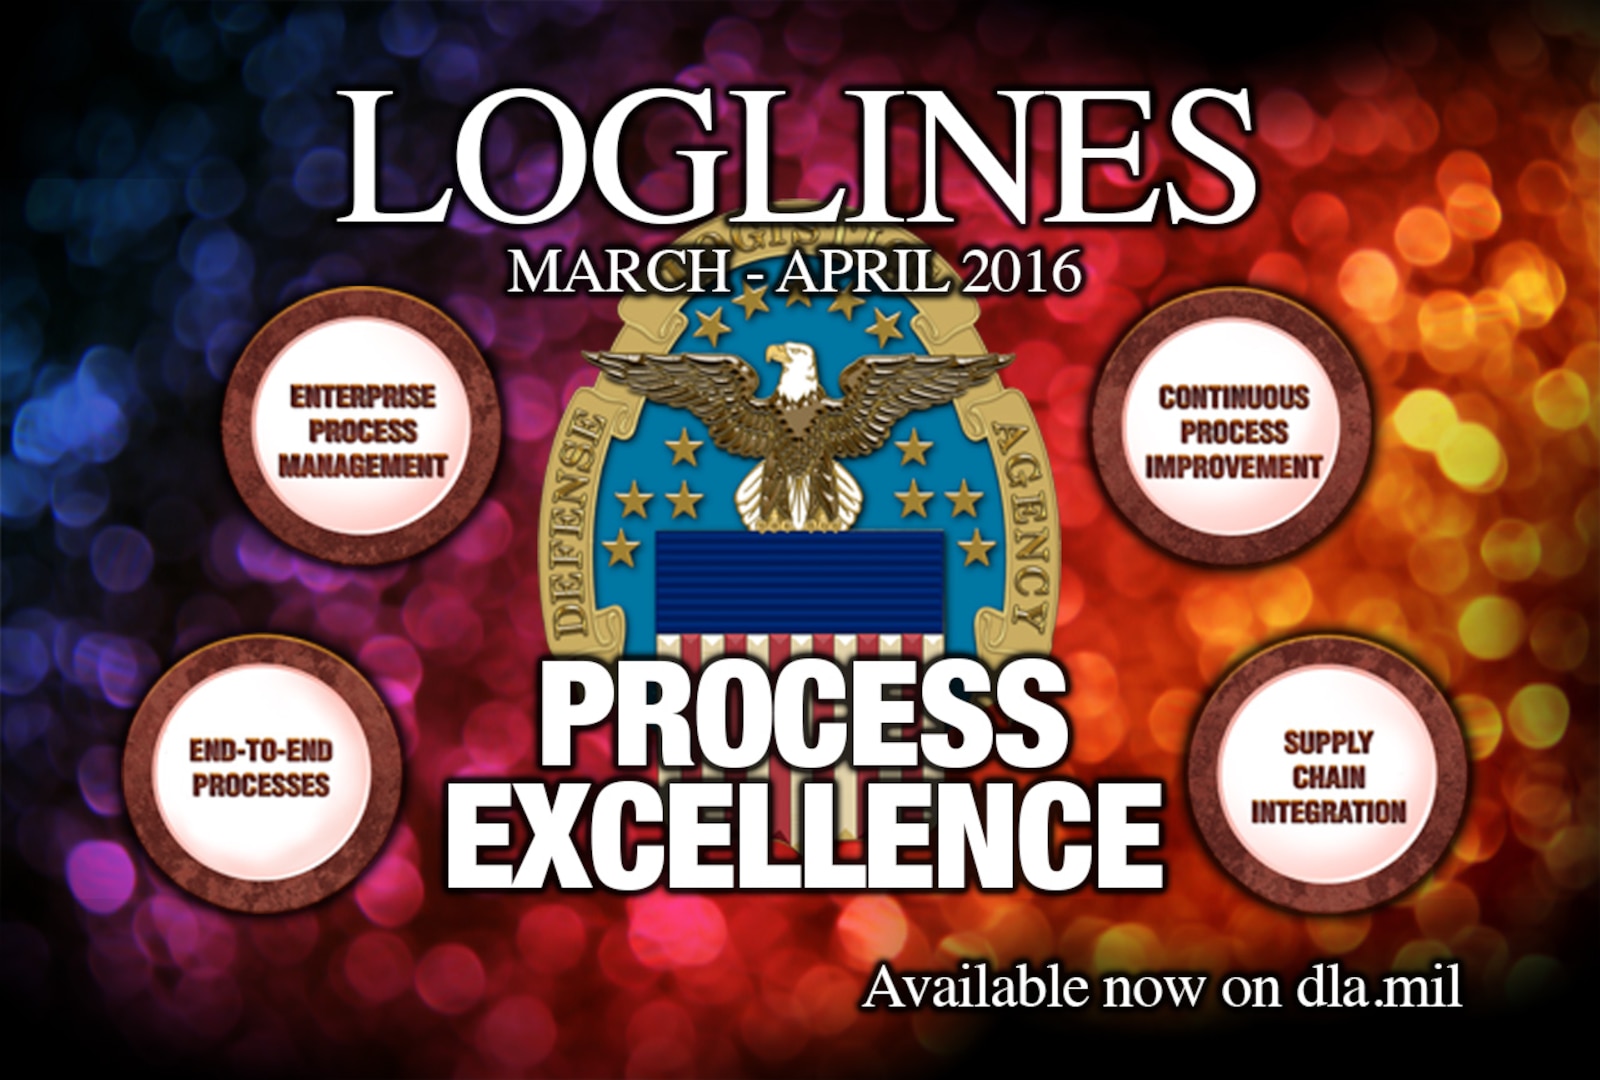 The March/April issue of Loglines magazine, “Process Excellence,” is now available in print and online.